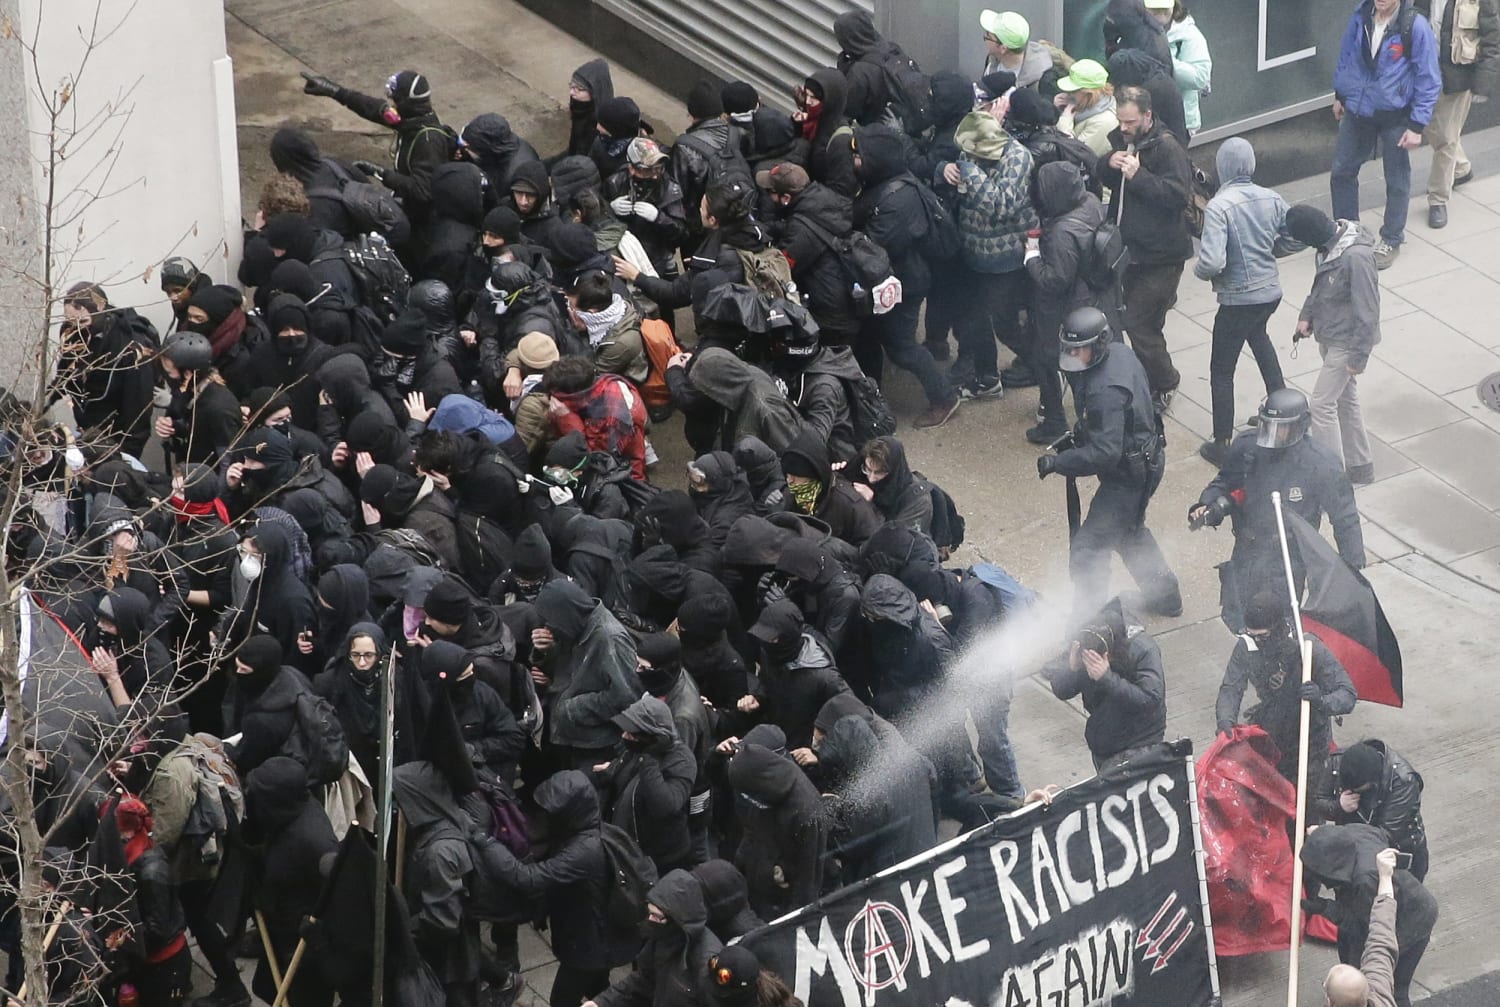 More Than 100 Inauguration Day Protesters Indicted on Rioting Charges